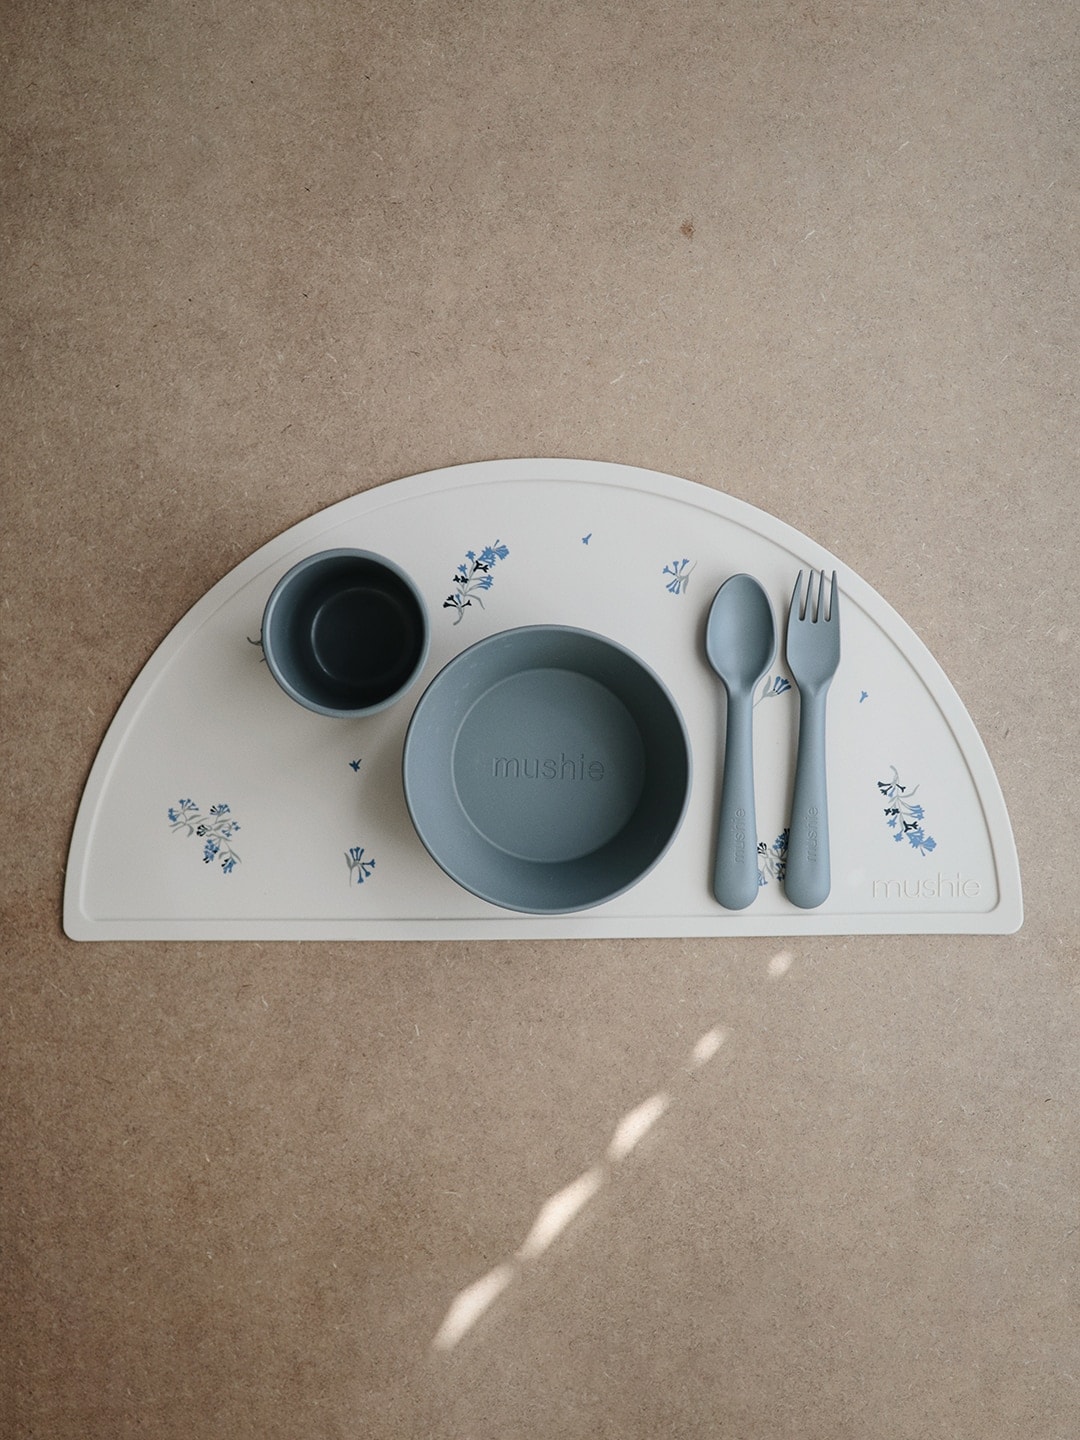 Mushie silicone place mat